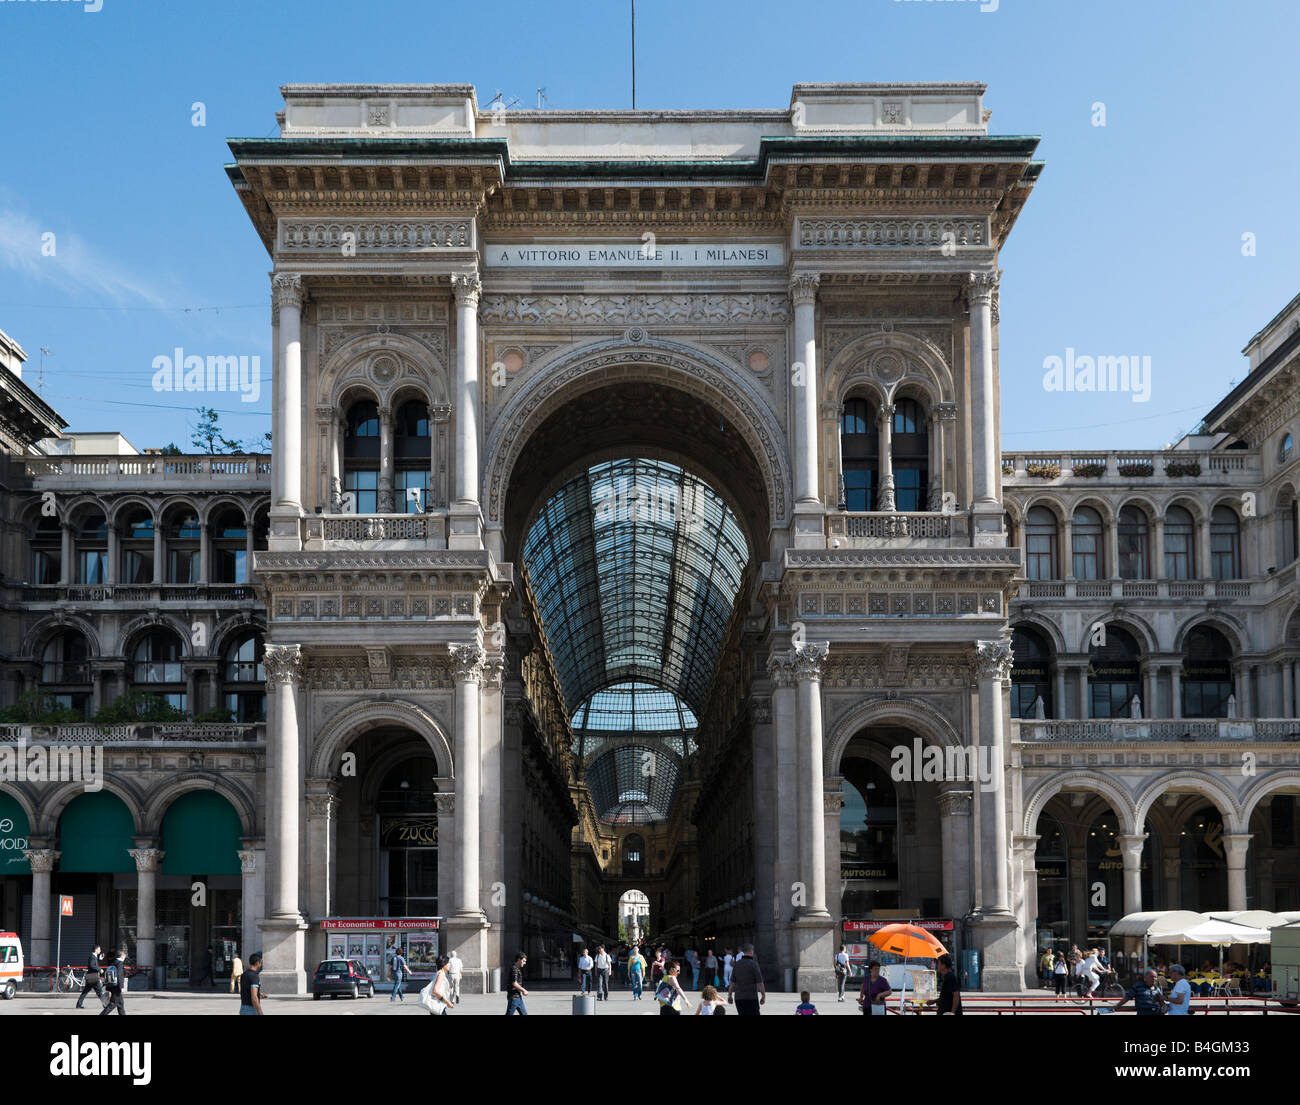 Entrance to Galleria Vittorio Emmanuele II designed by Guiseppe Mengoni, Piazza del Duomo, Milan, Lombardy, Italy Stock Photo